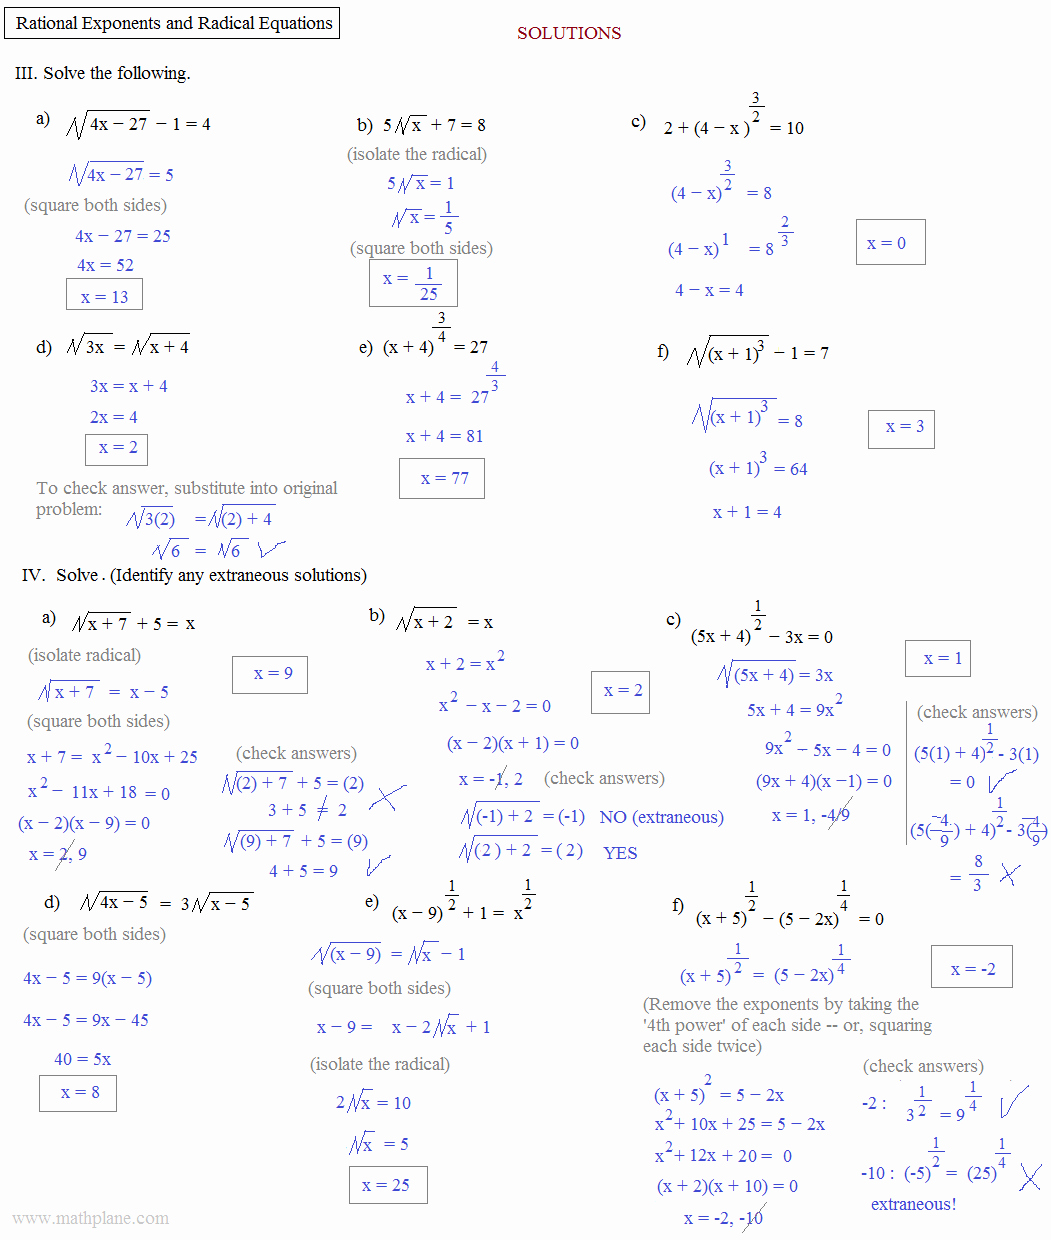 Rational Exponents and Radicals Worksheet New Exponent Rules Worksheet 2 Answer Key 1000 Ideas About